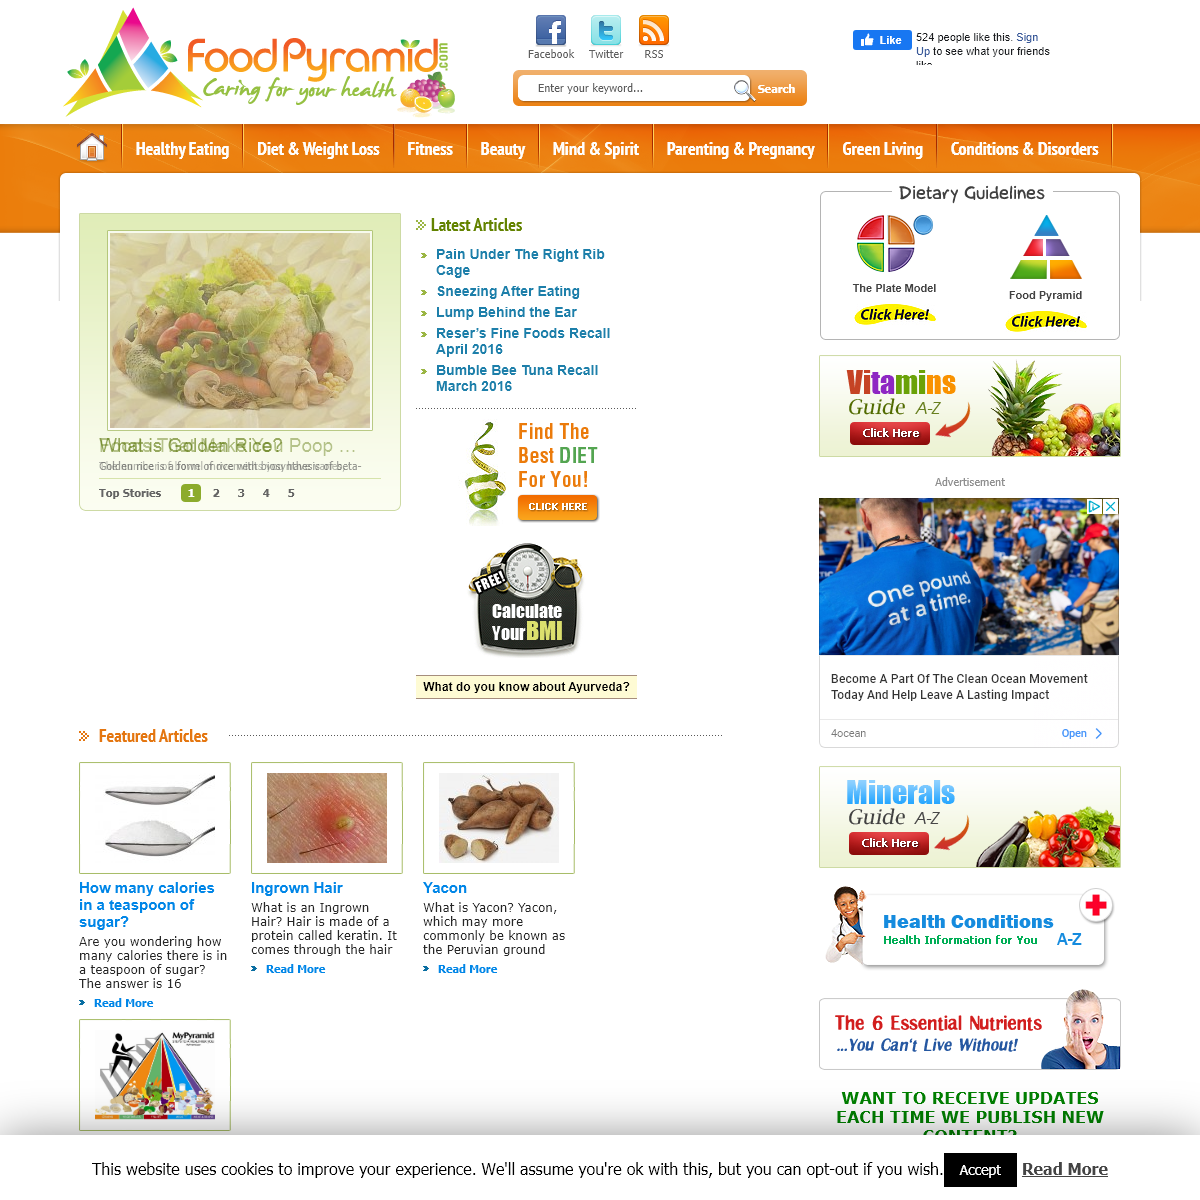 Food Pyramid - Food Guide Pyramid - Dietary Guidelines - MyPlate